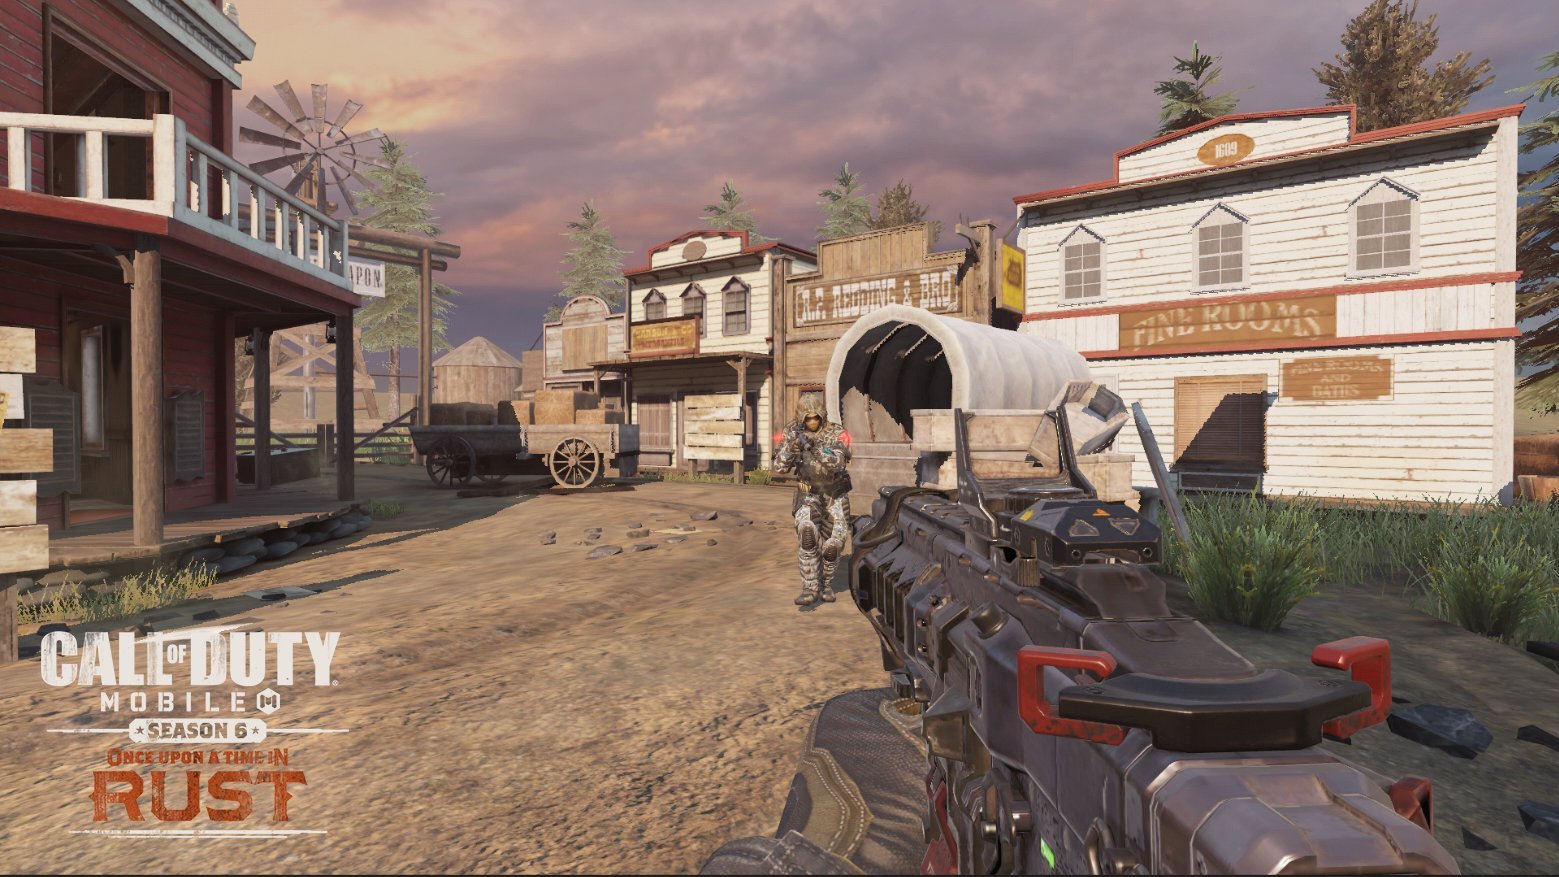 Call Of Duty Mobile Season 6 Launches With Rust And Saloon Maps Vgc